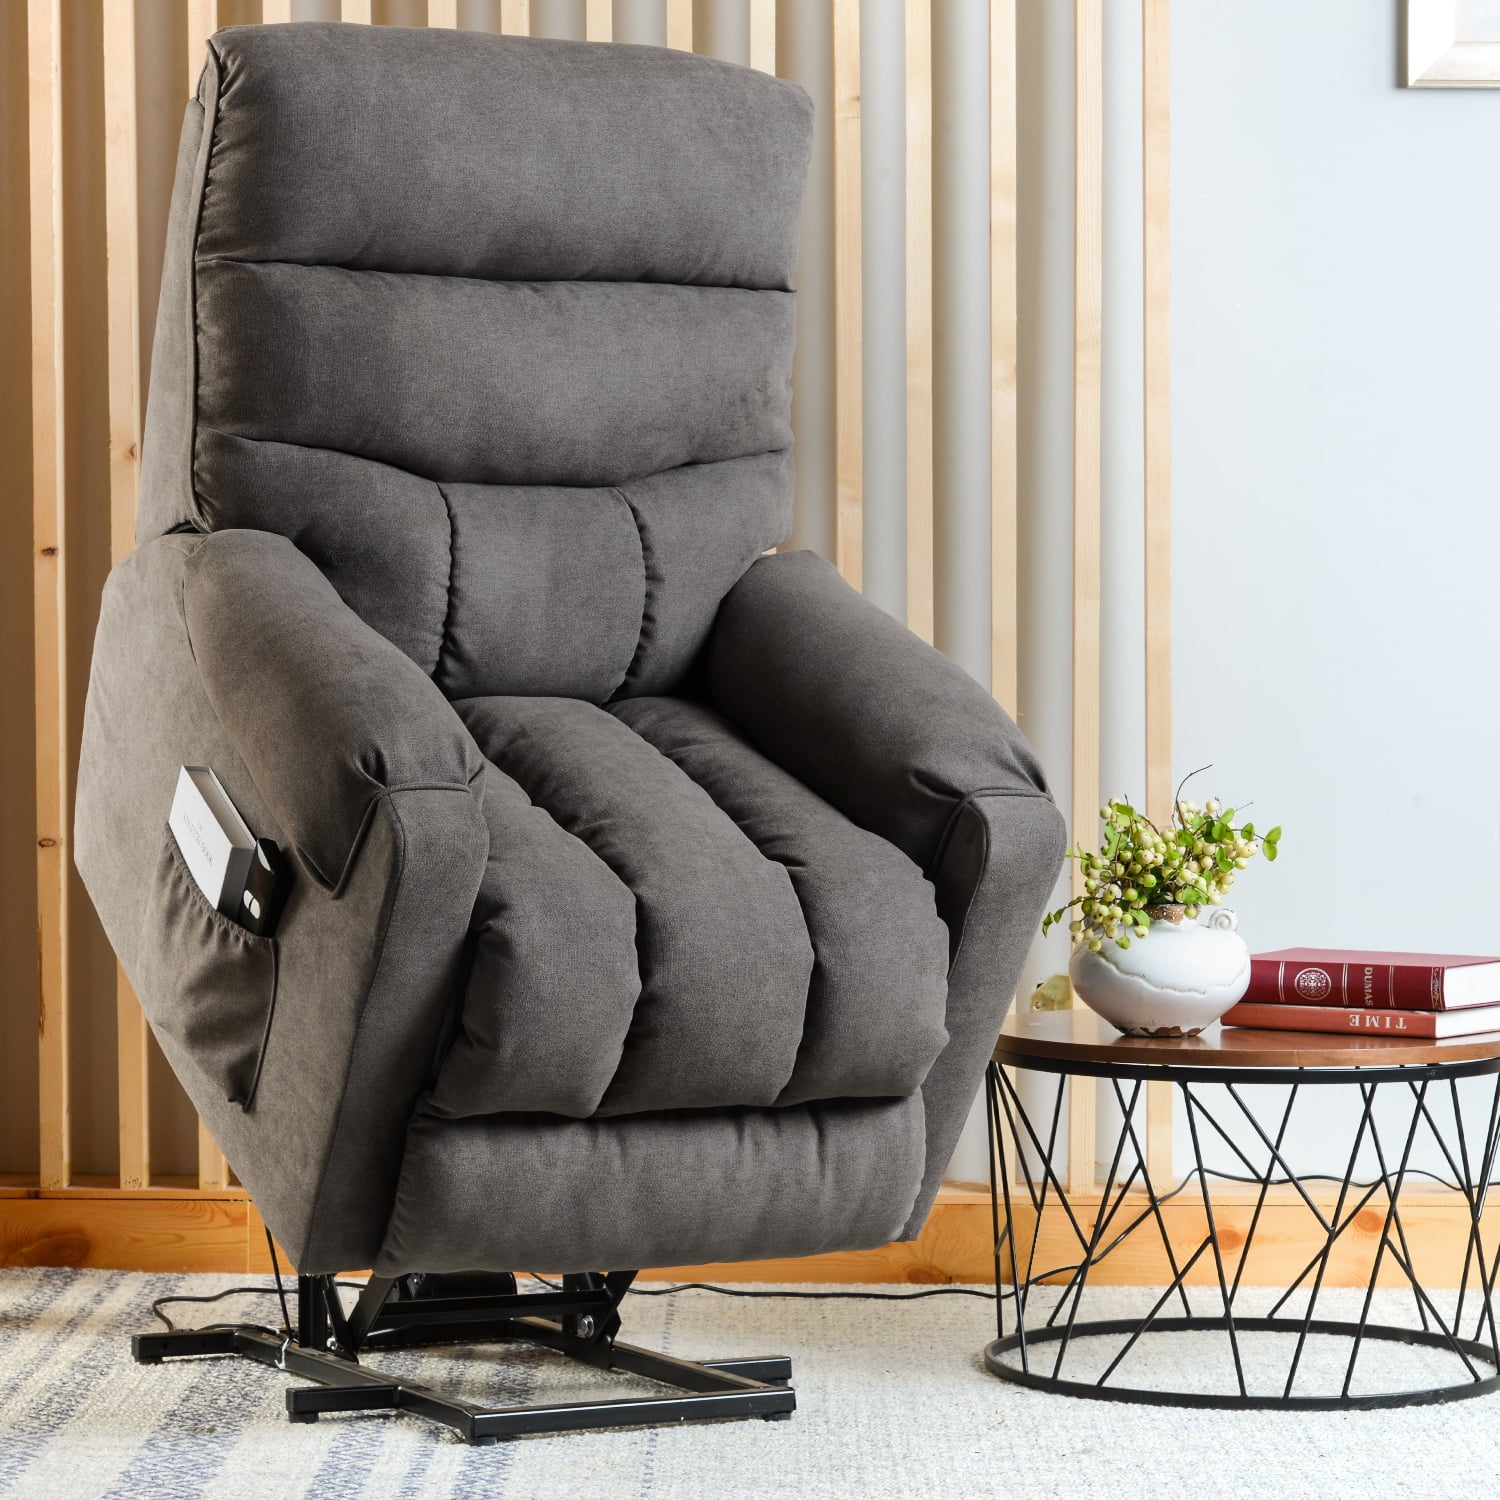 harperbright designs electric power lift recliner chair with side pocket  for elderly multiple colors  walmart